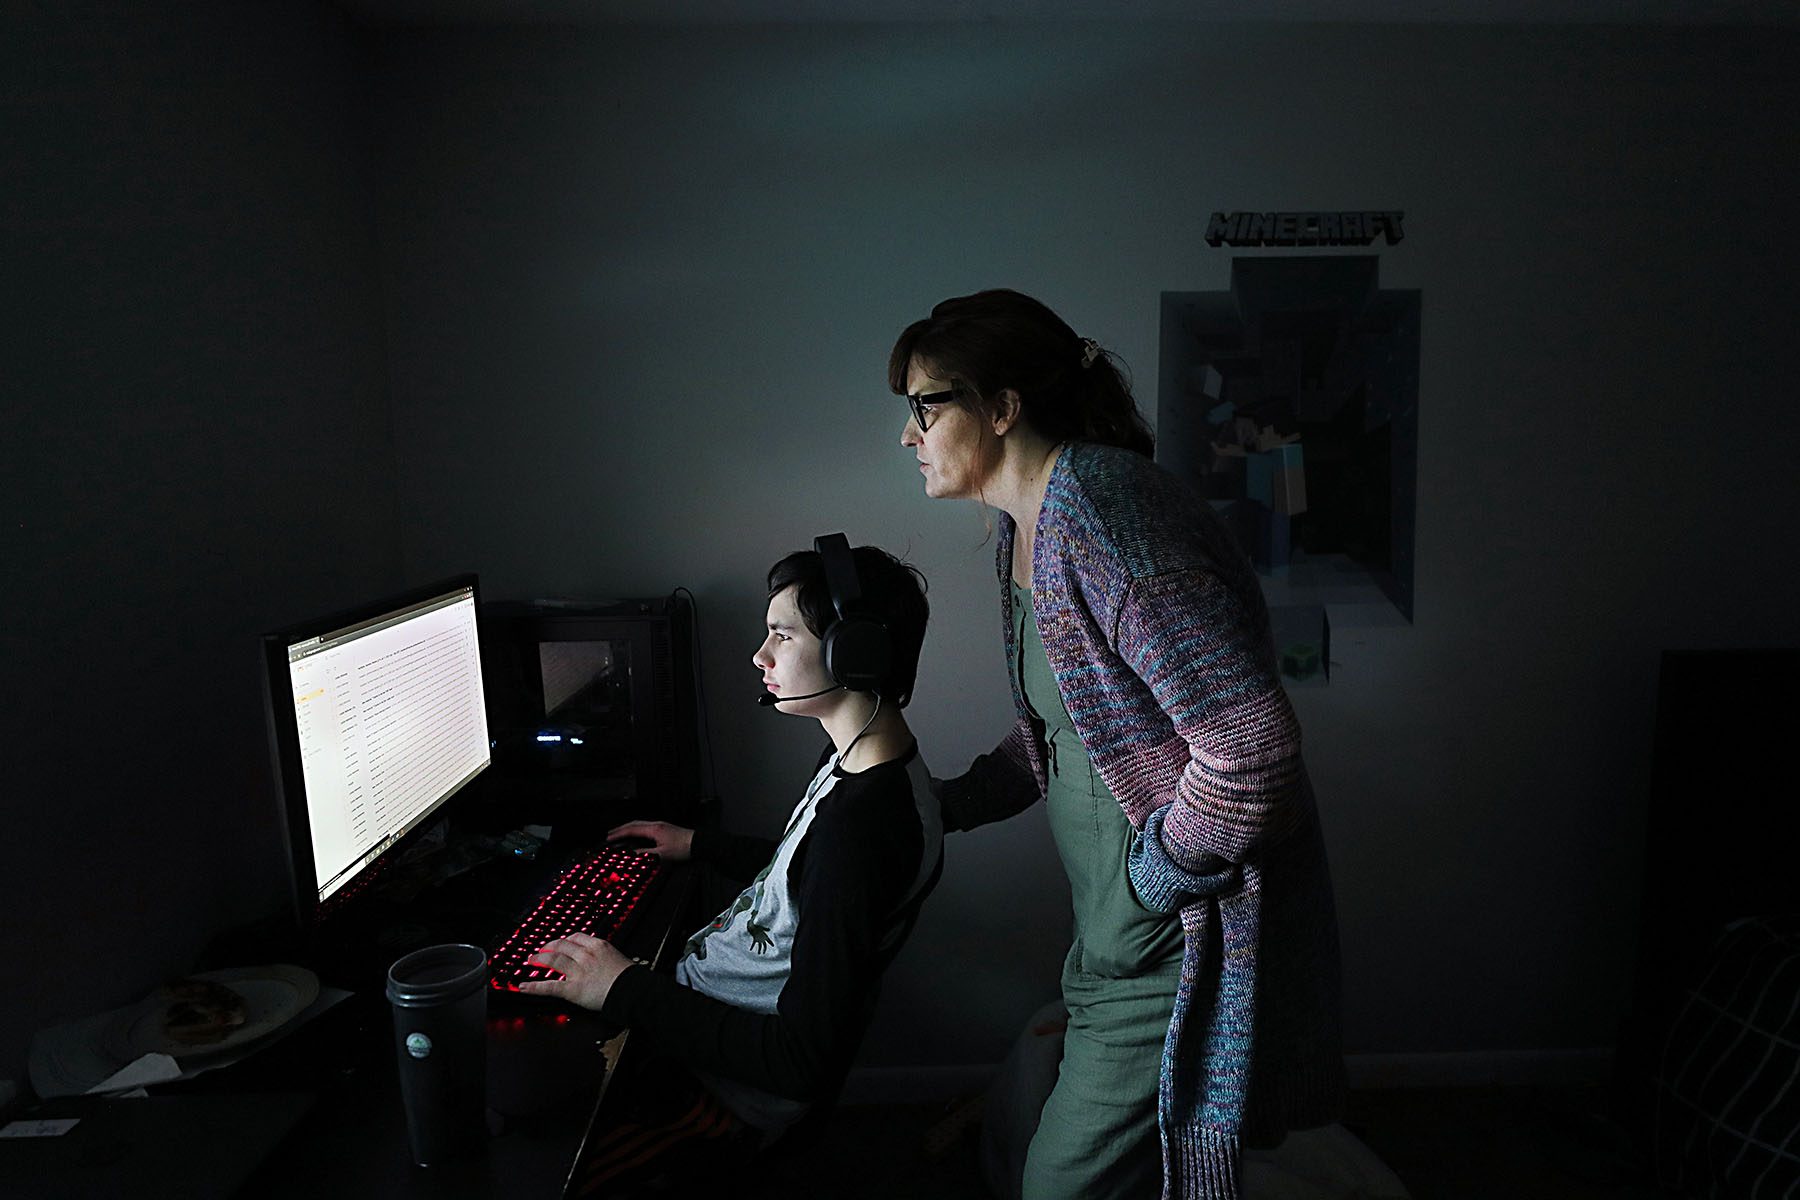 A mother stands over her son while he works on a computer.